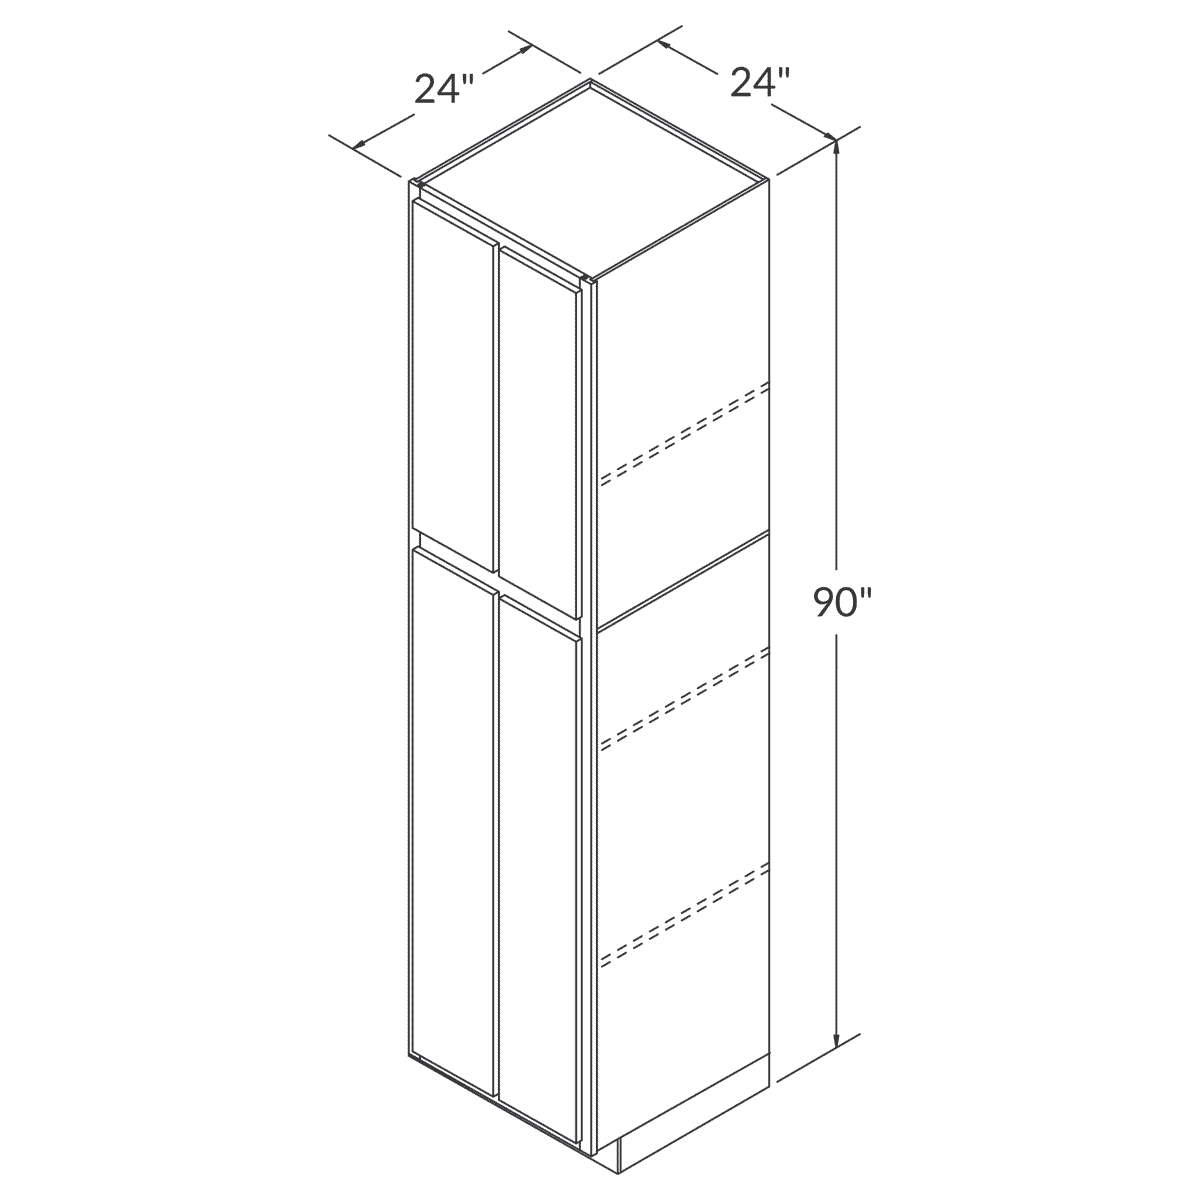 J&K S2 Almond  Tall Pantry 24"W x 90"H Assembled Cabinet Wireframe